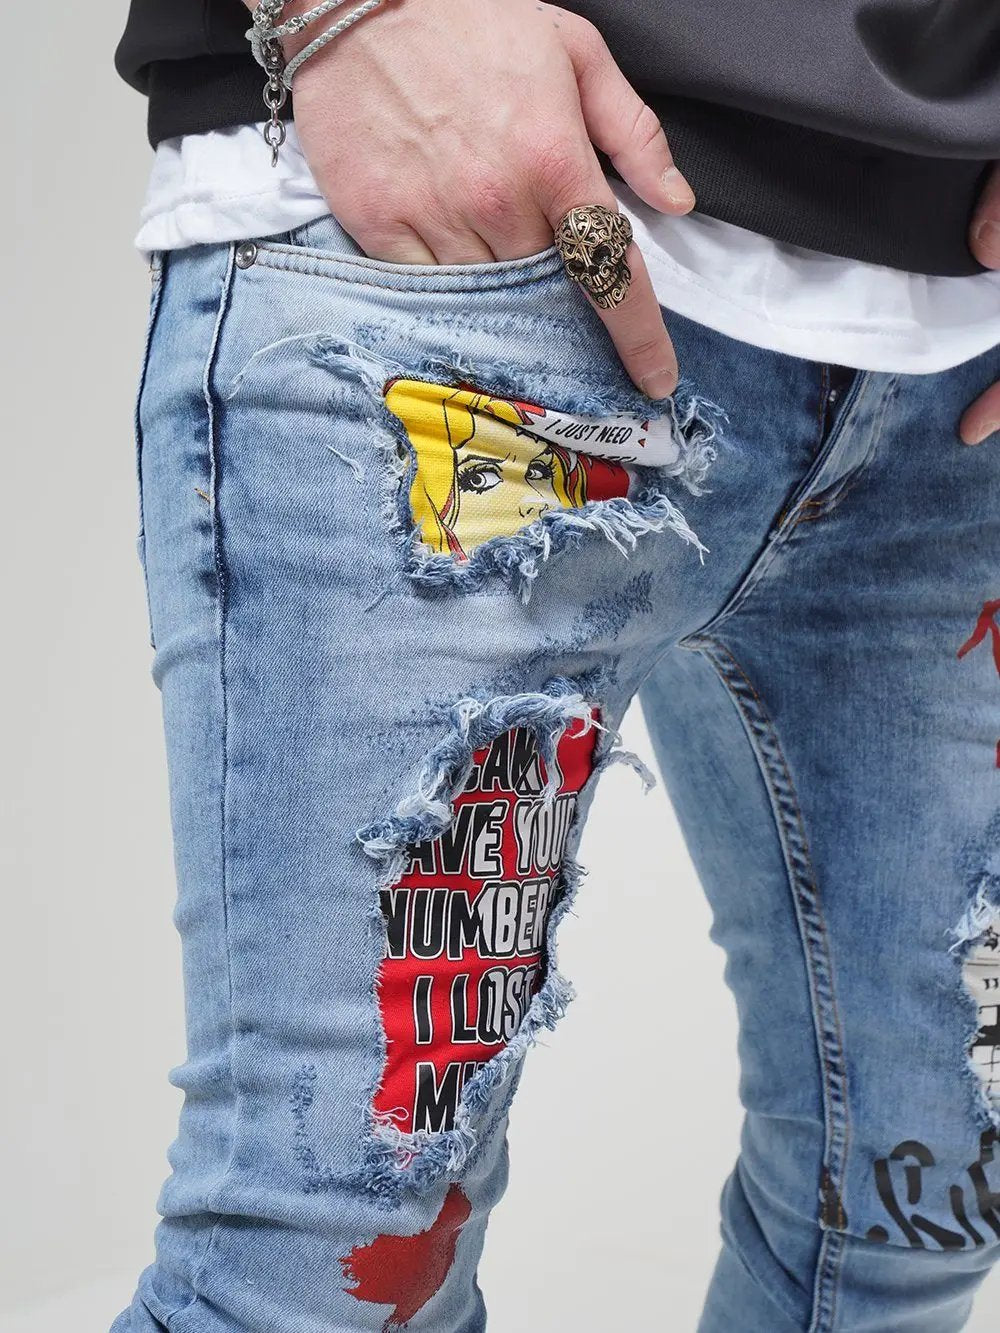 A man wearing ripped jeans with BANKSY graffiti on them.